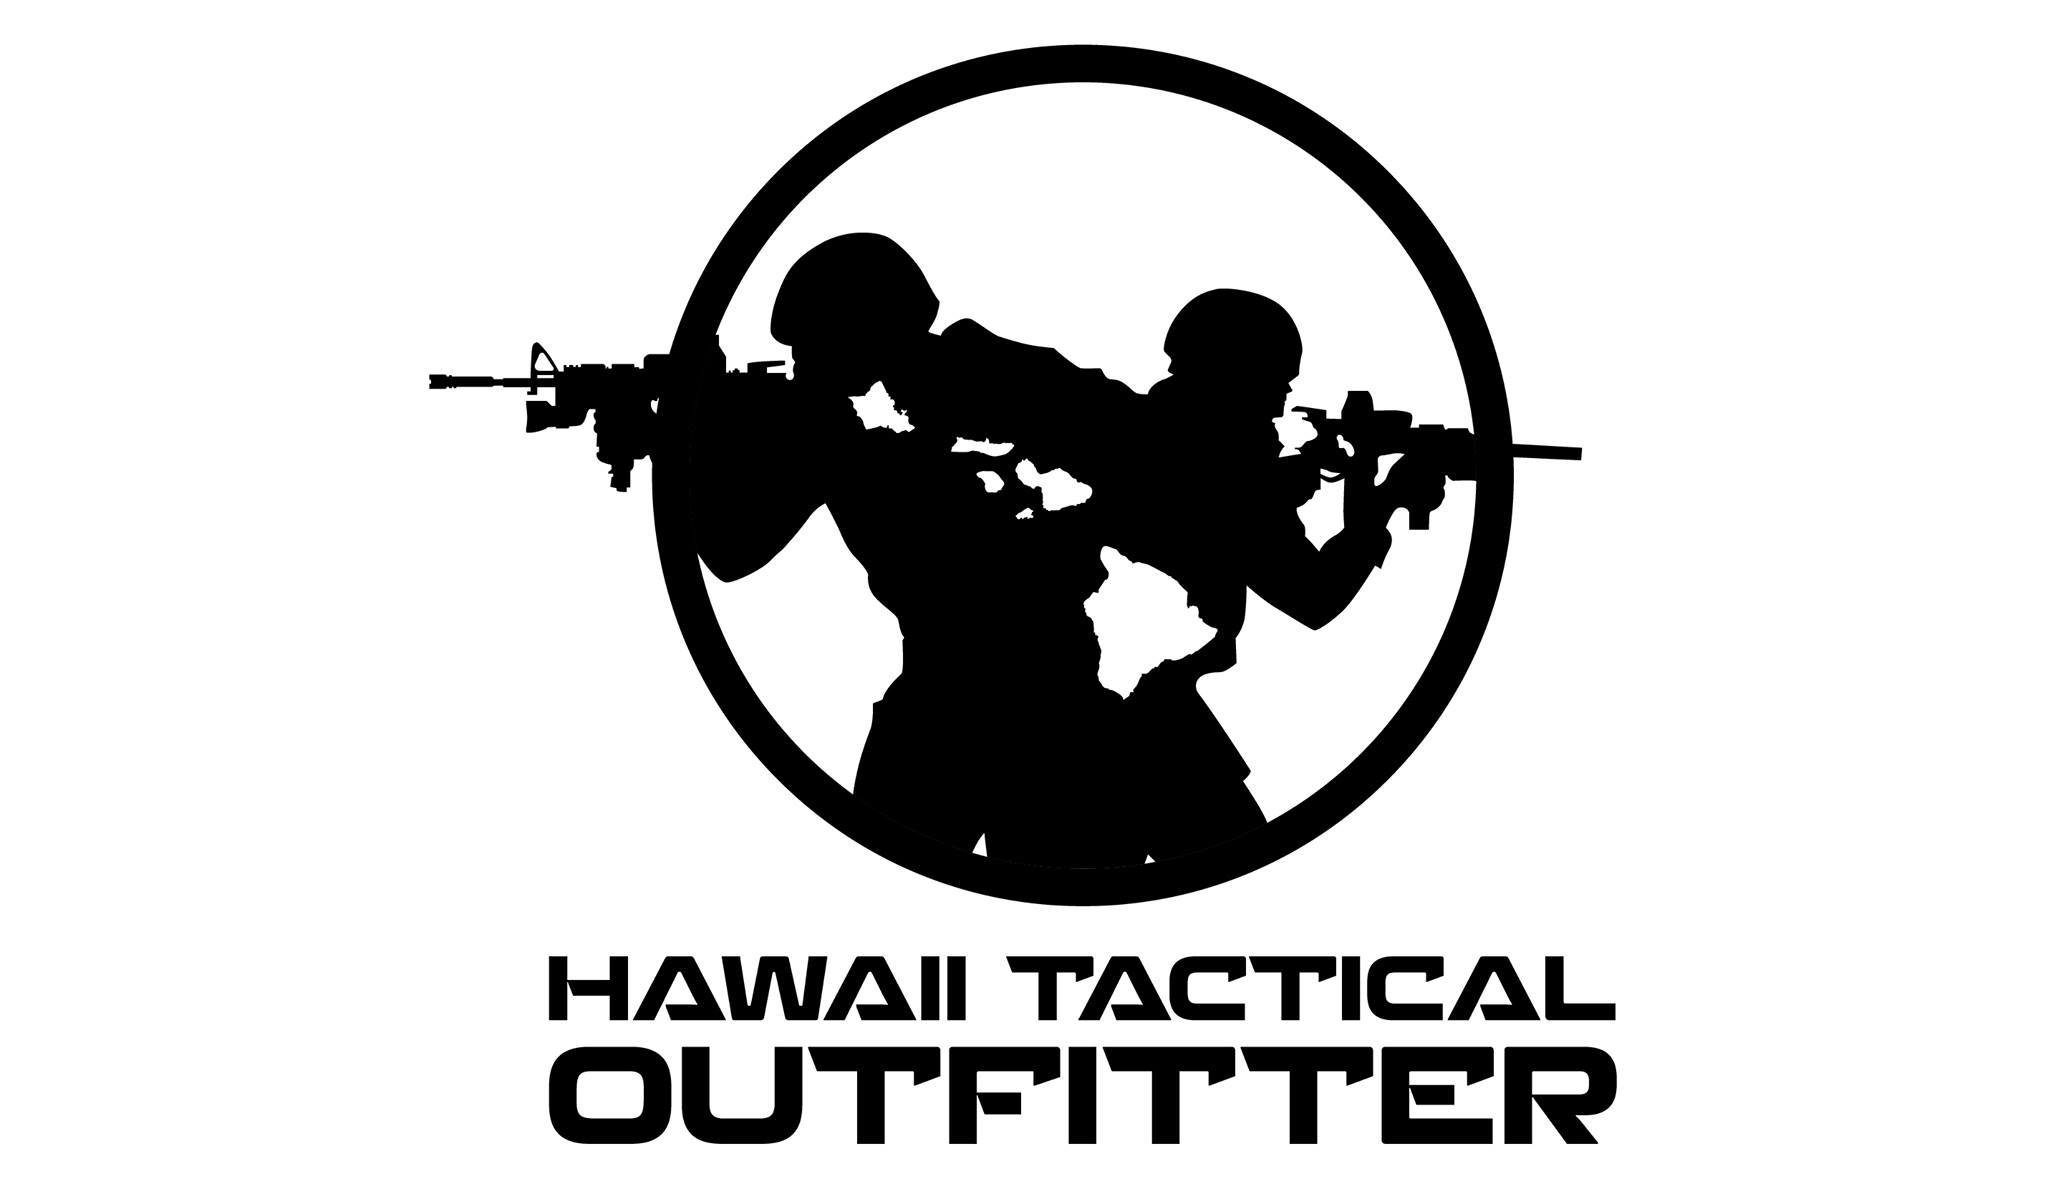 Hawaii Tactical Outfitter